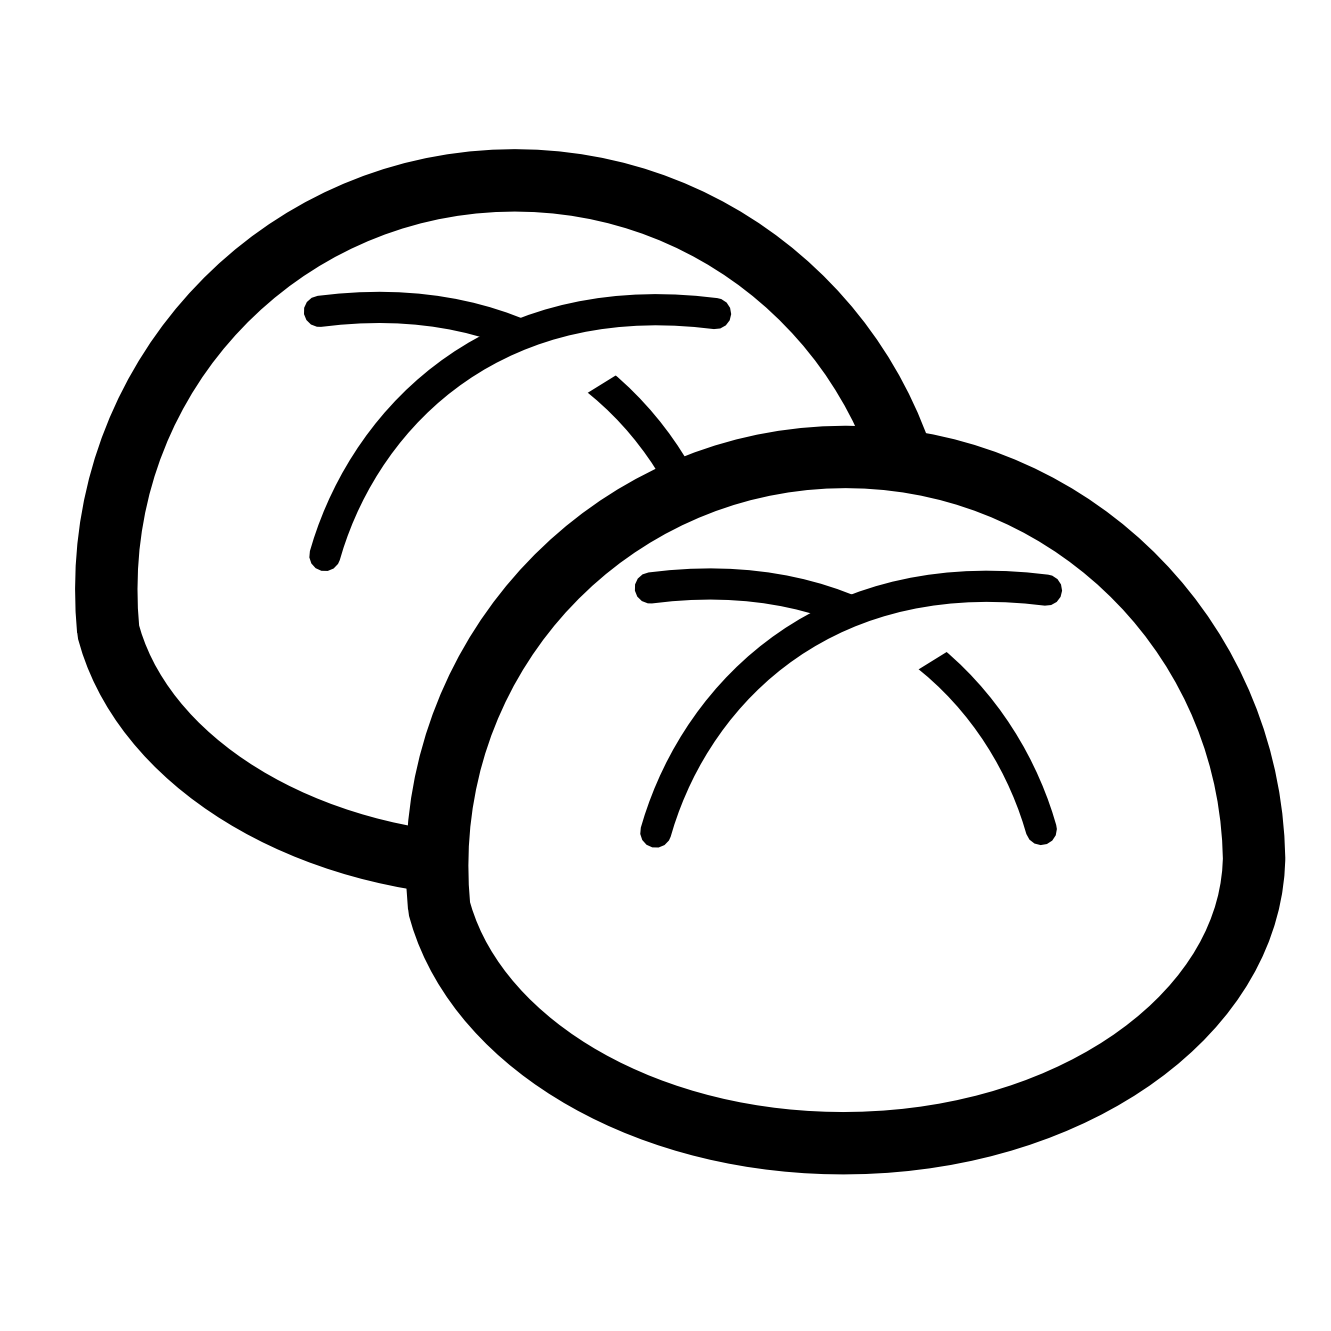 Cinnamon Roll Clipart Png